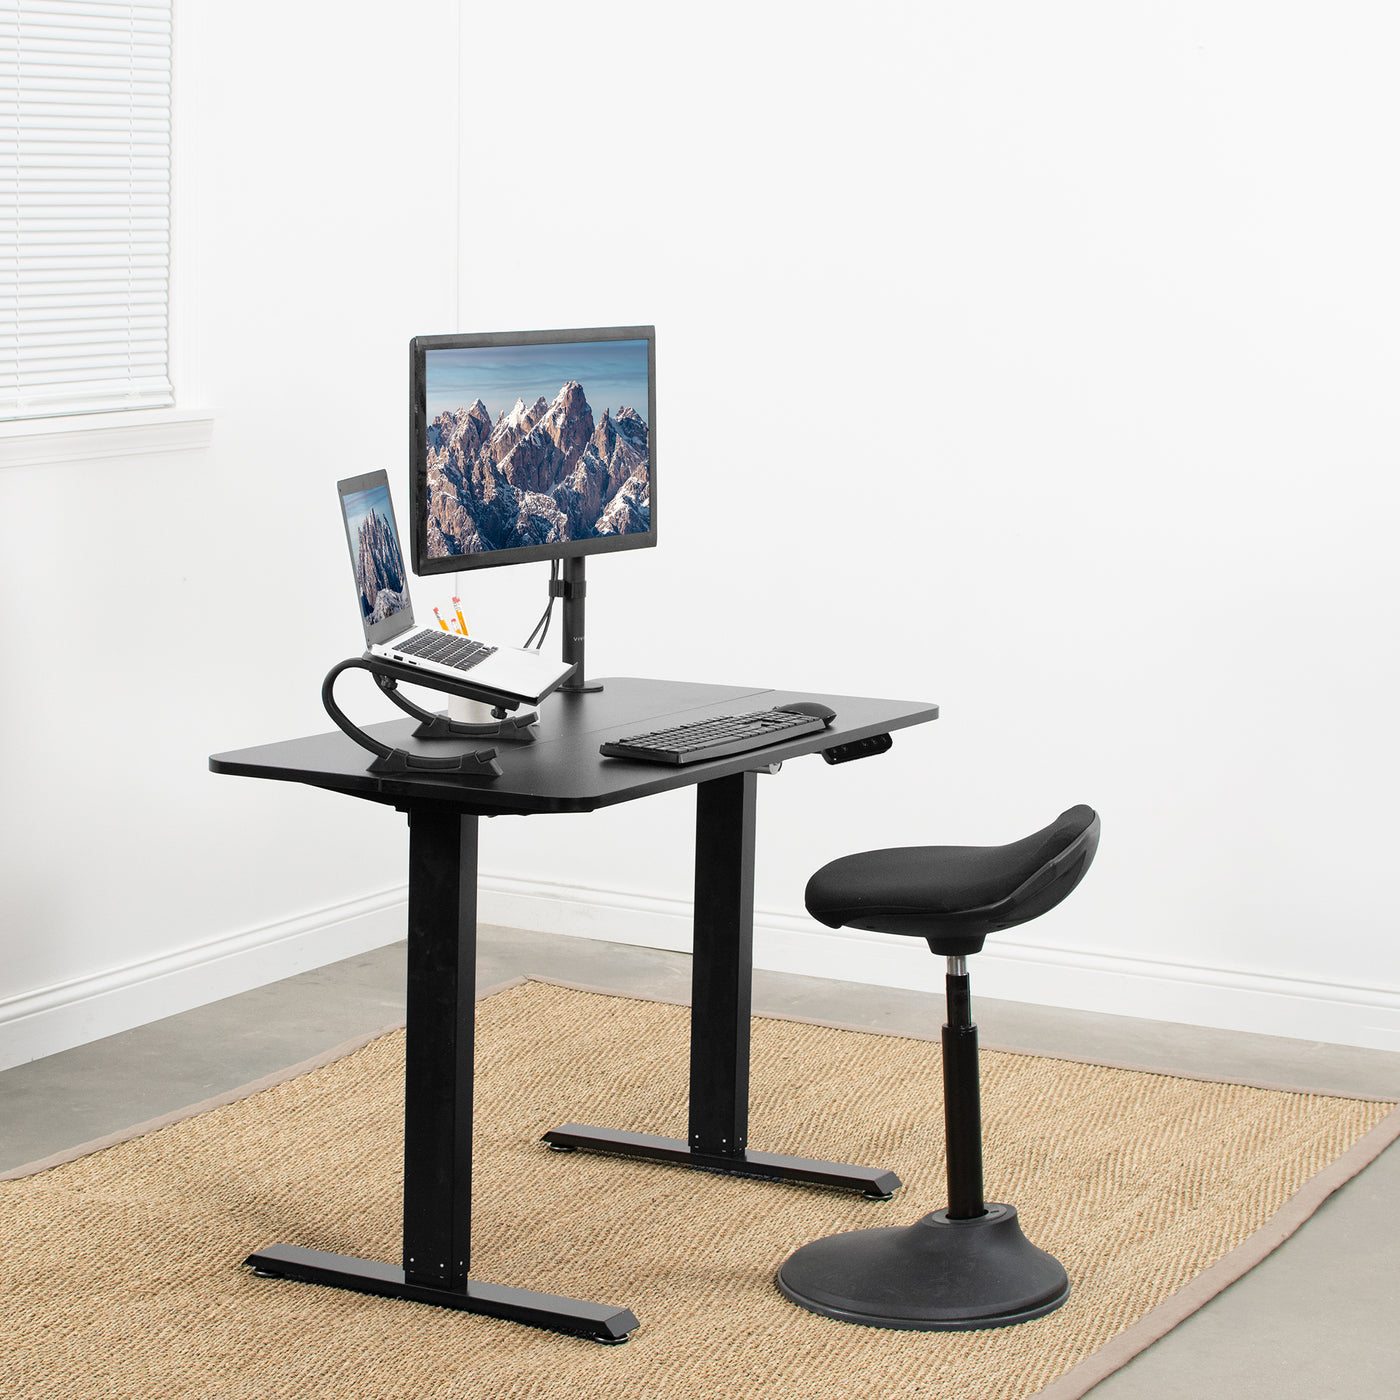 Small height adjustable desk in an office workspace.